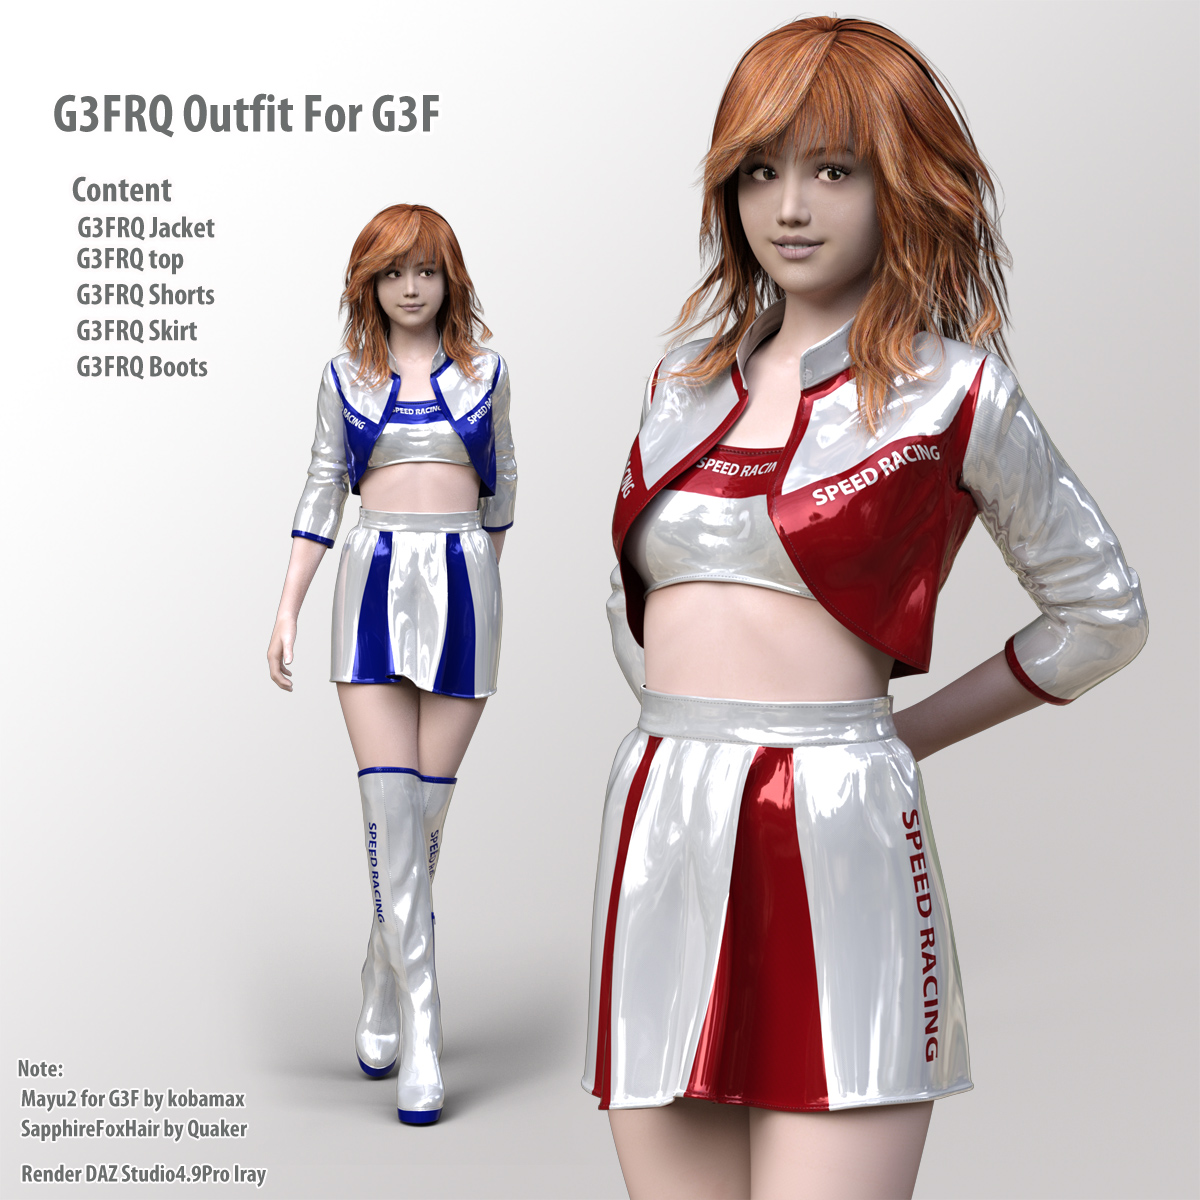 G3FRQ Outfit for G3F